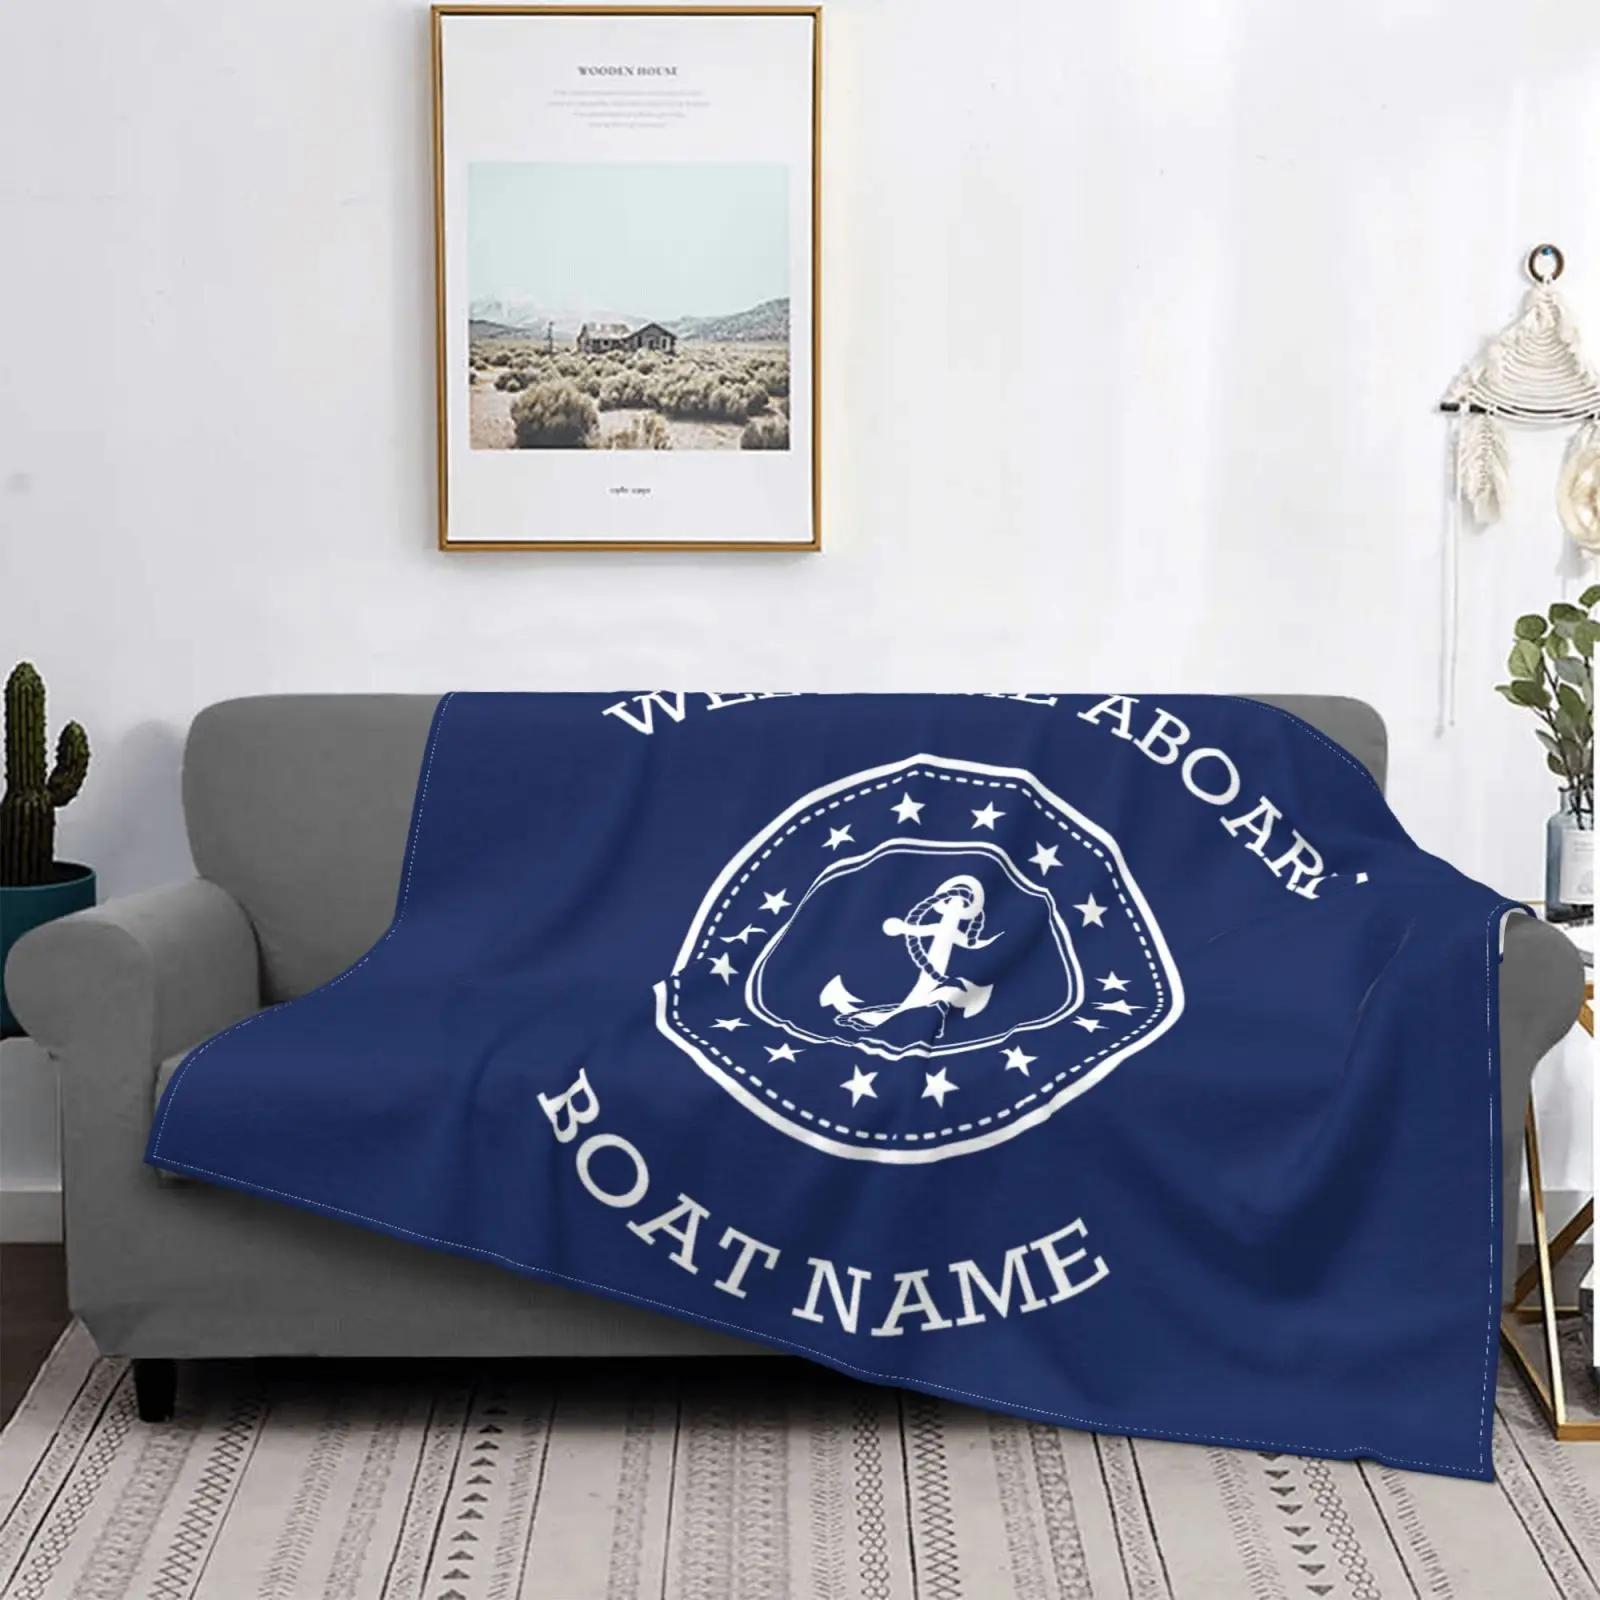 Deep Sea Color Nautical Upholstery Blanket Soft Flannel Blanket Breathable Ultra Warm Bedding and Travel Blanket Cus